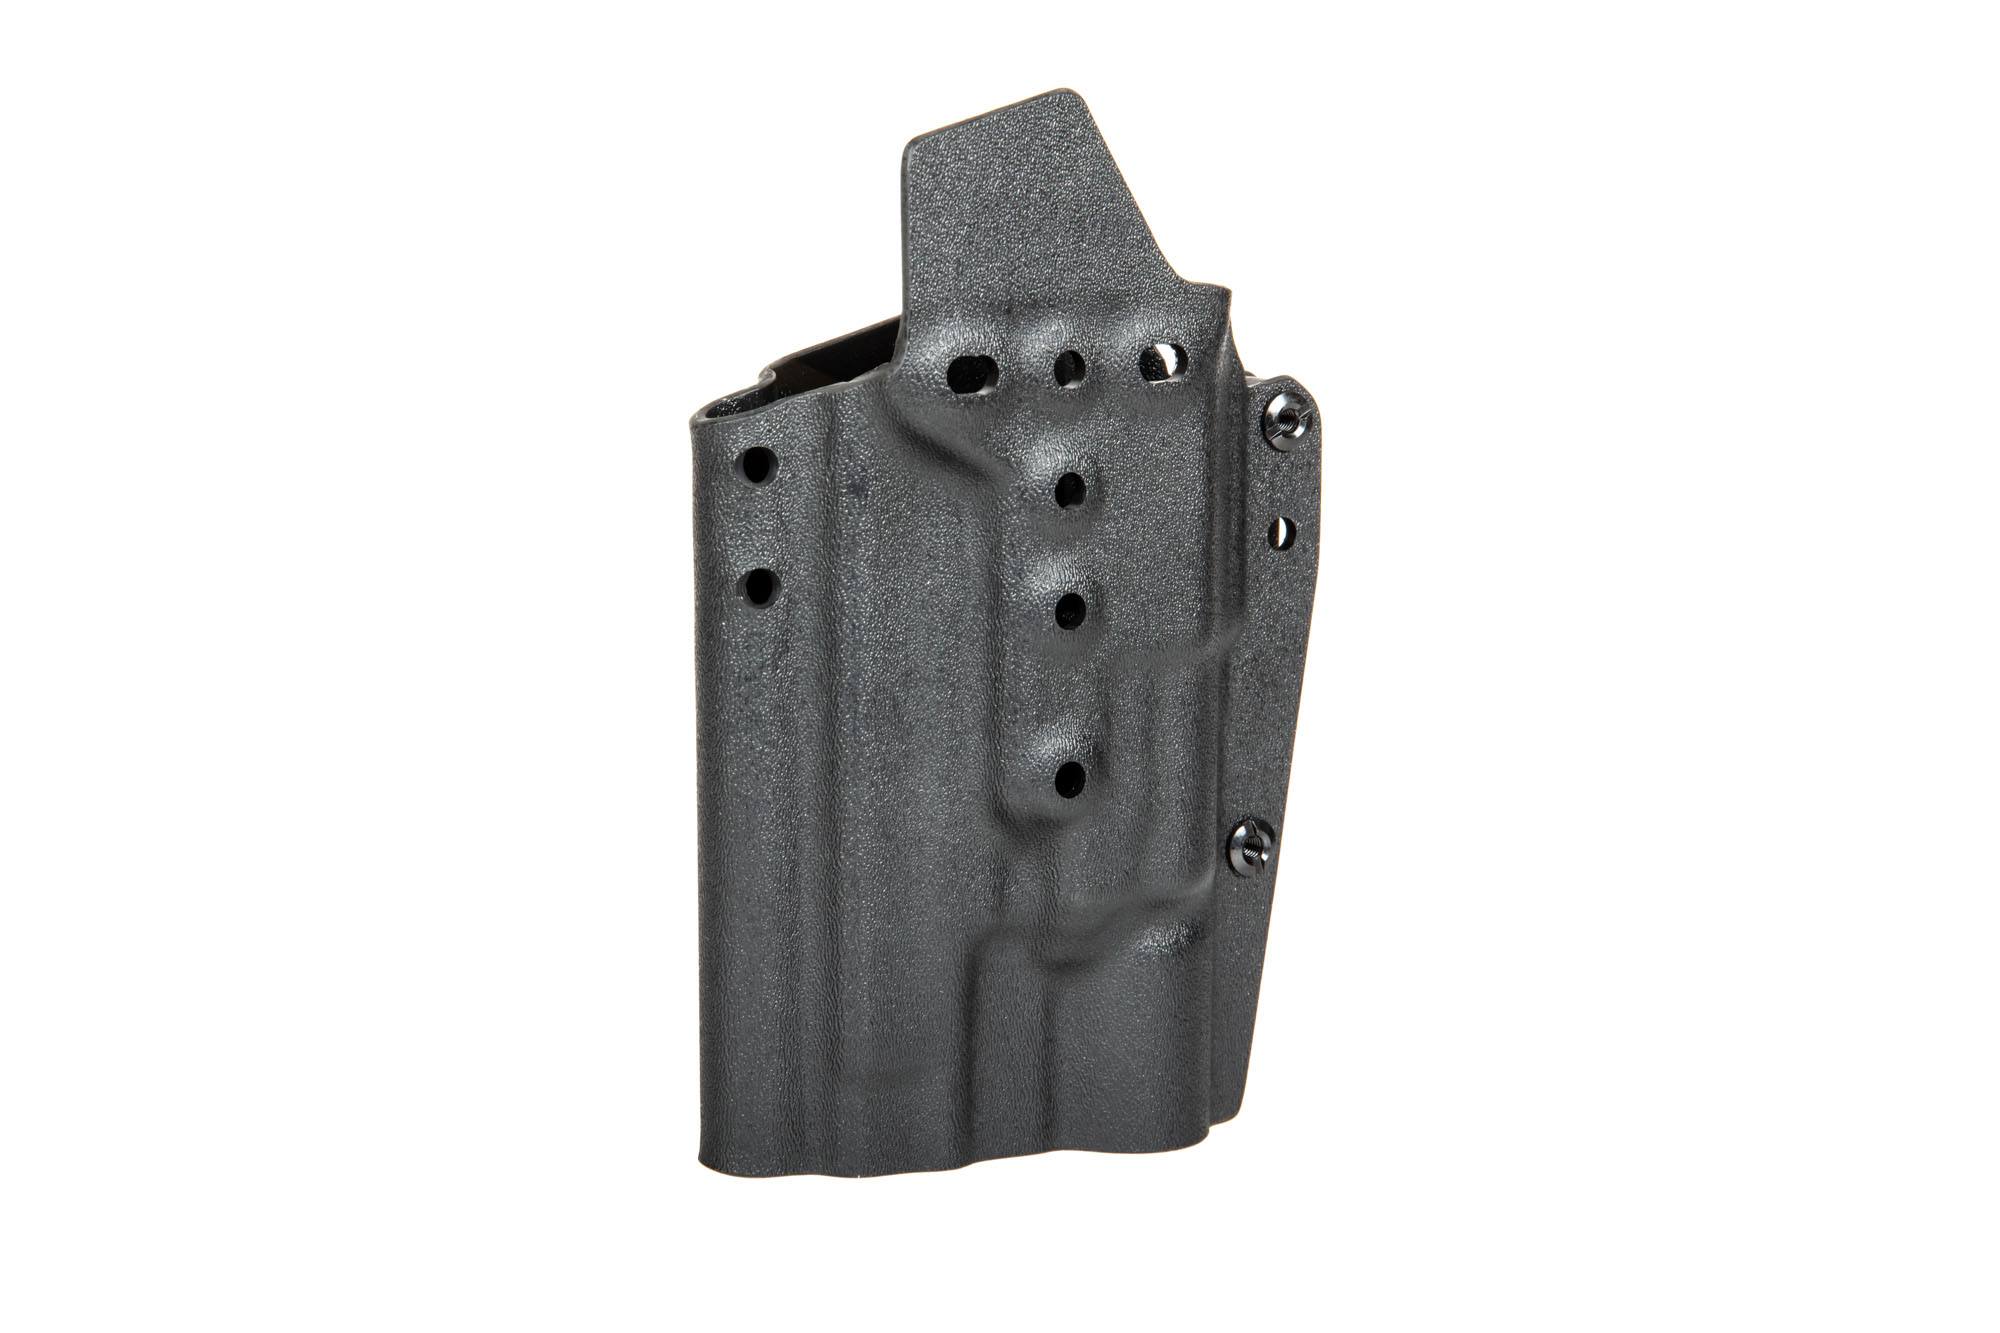 Kydex Holster for P226 Replicas with X300 Flashlight - Black